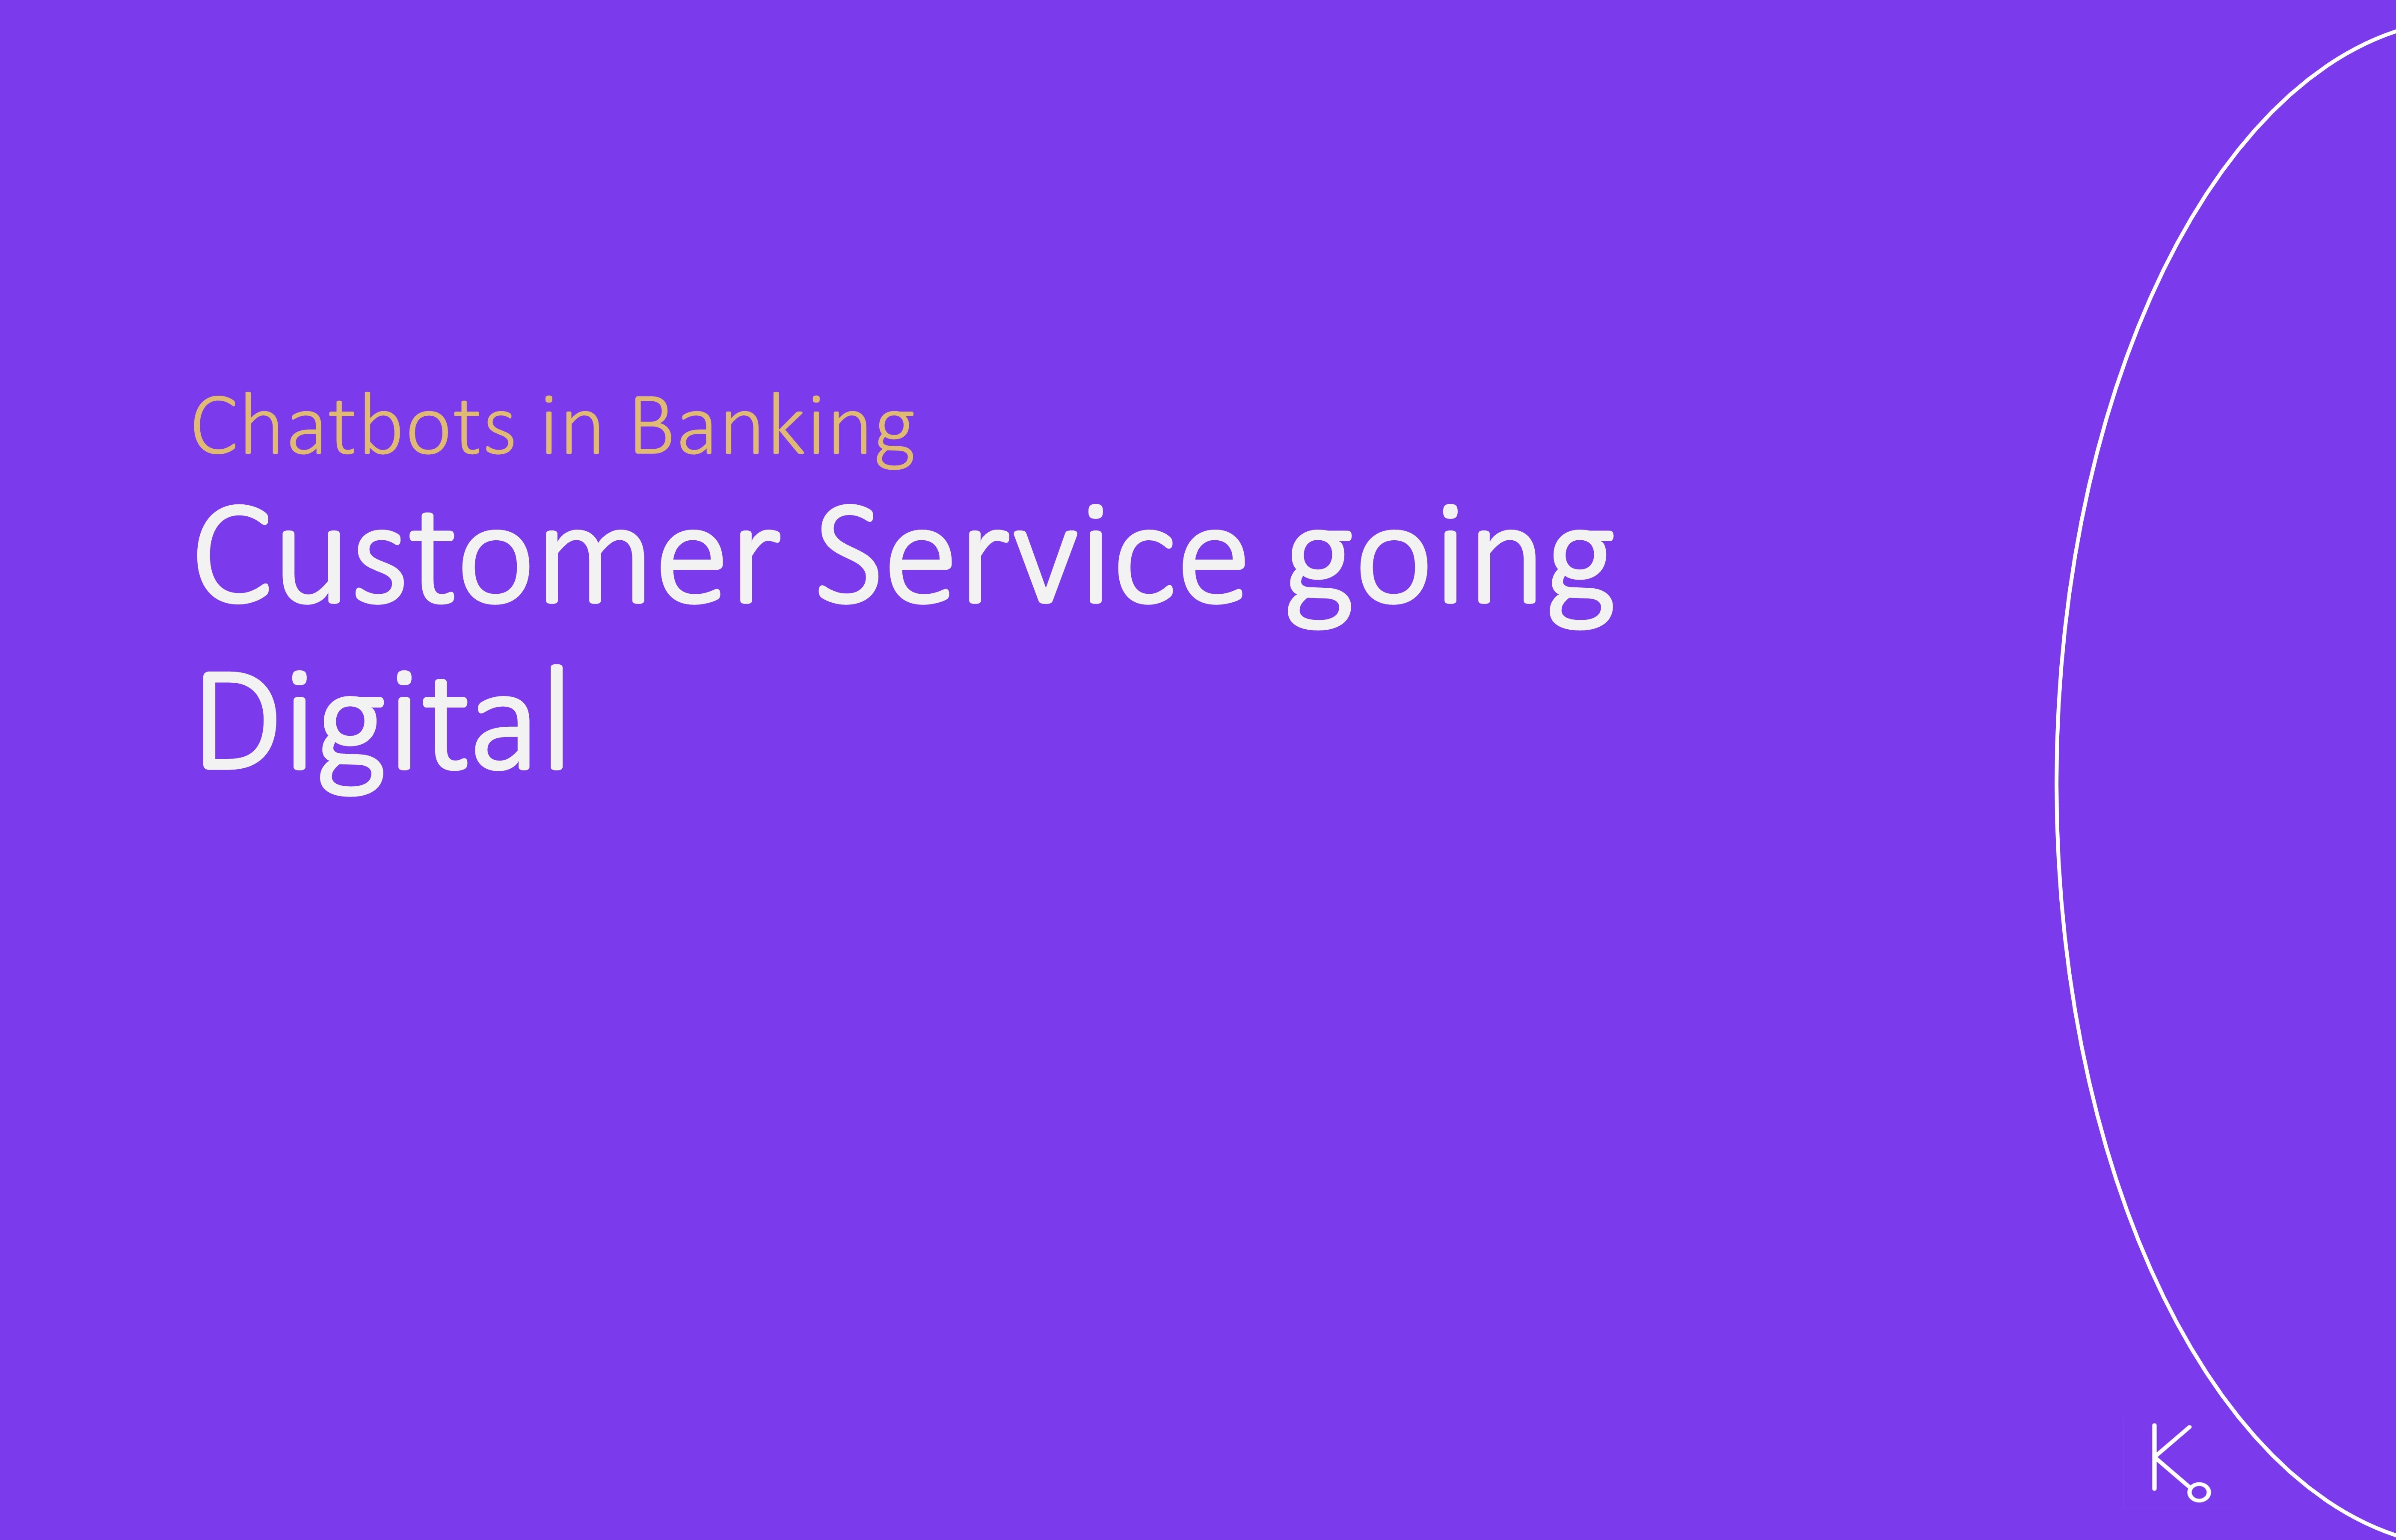 Customer Service of banking is going digital